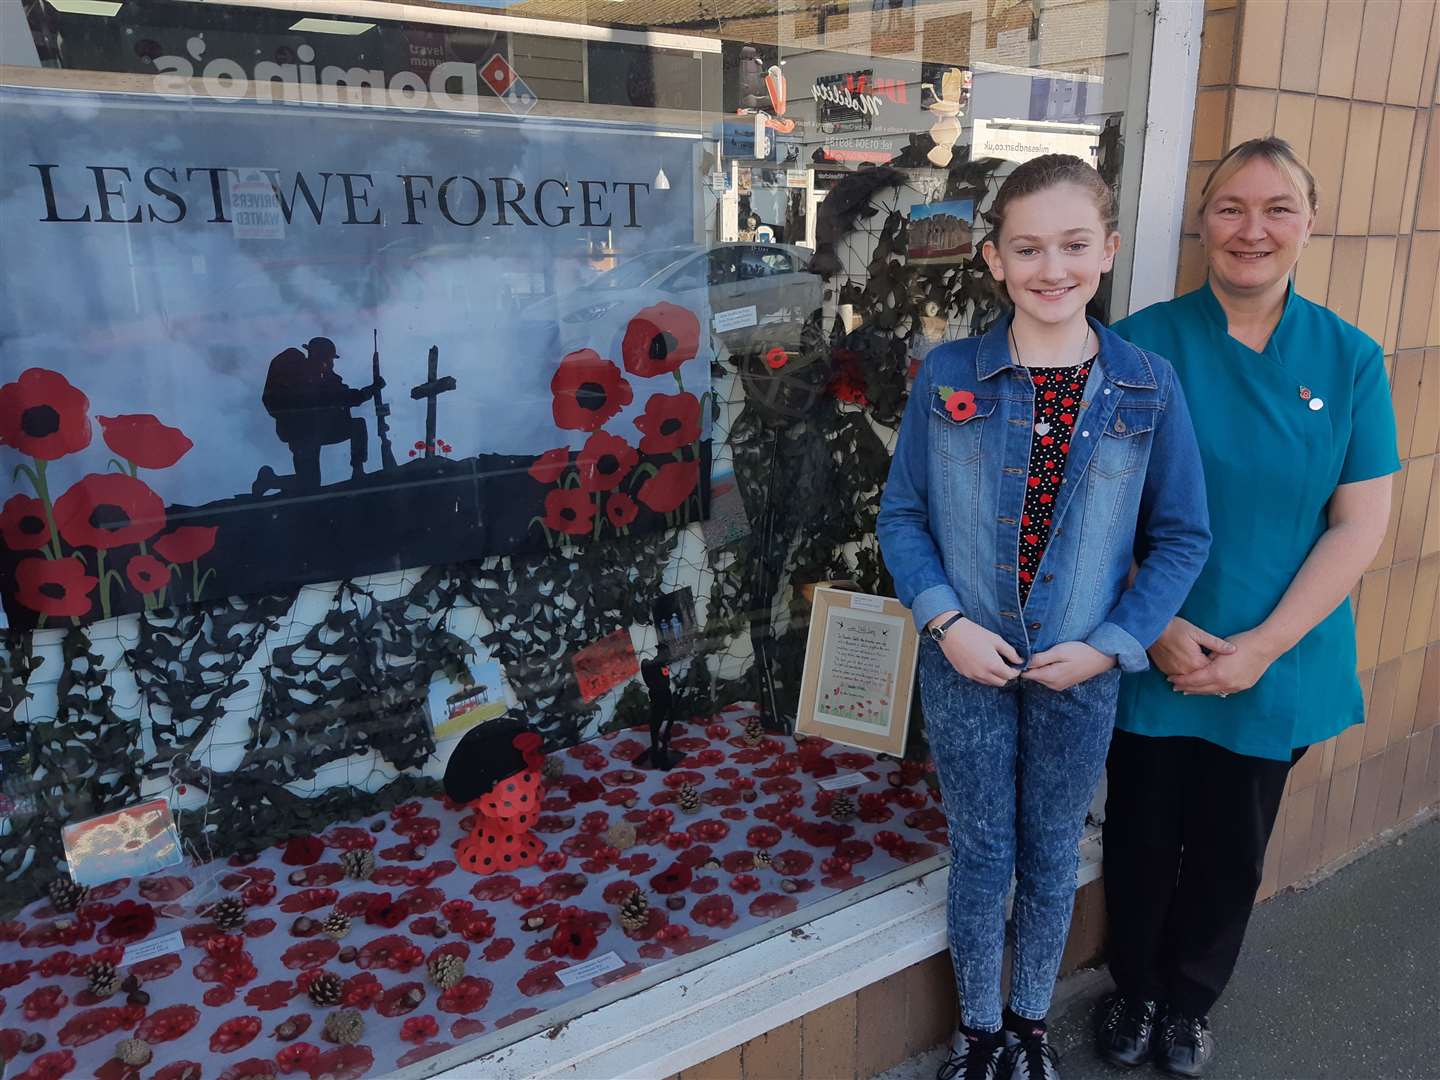 Mia Ellul wrote a Remembrance themed poem and Jayne Thomas from Paydens put it up in the chemist's display window